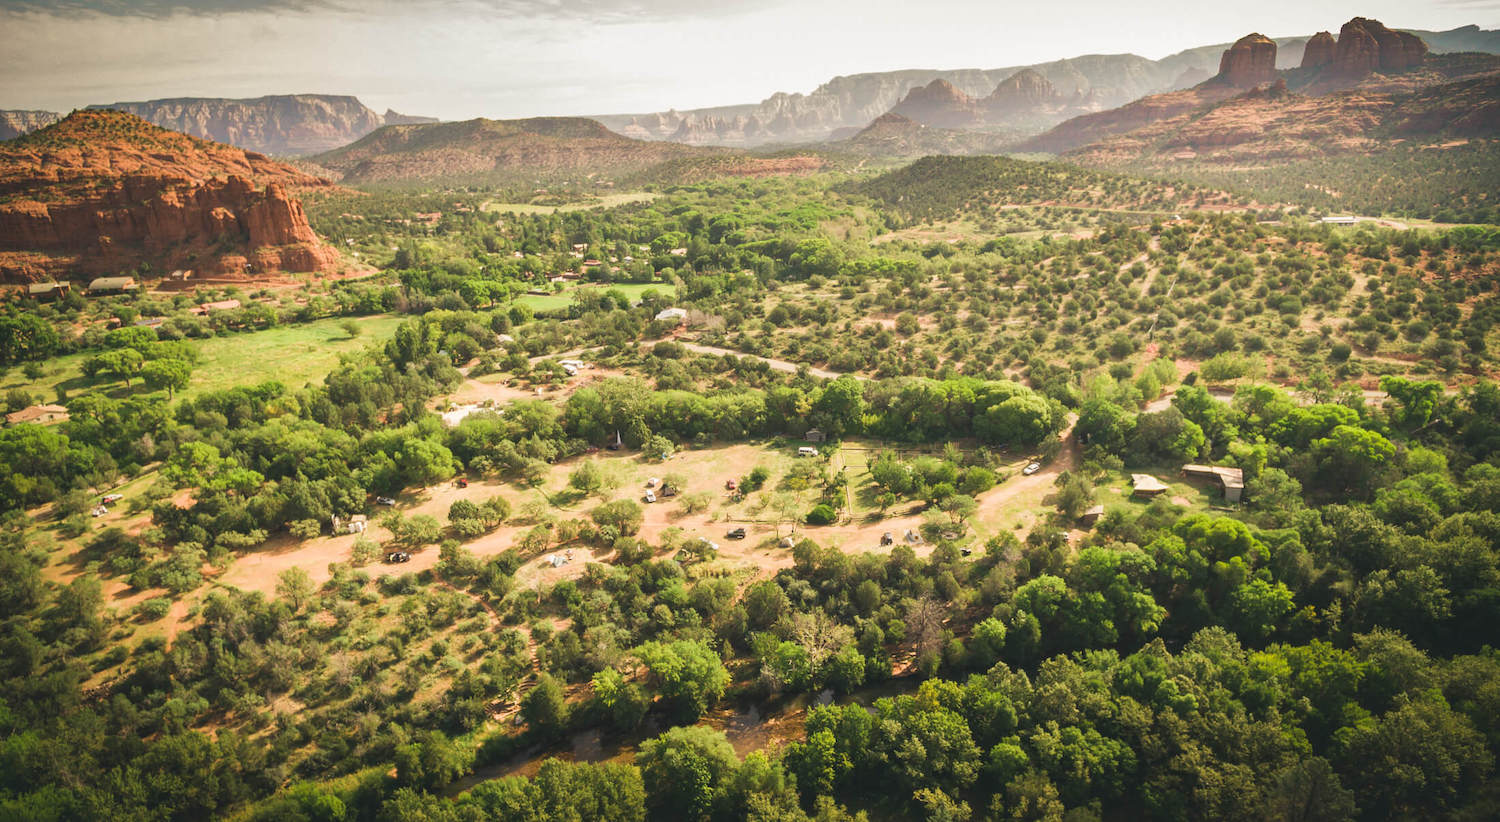 An aerial view of green fields lined with trees. In the background, red rock formations frame the horizon.